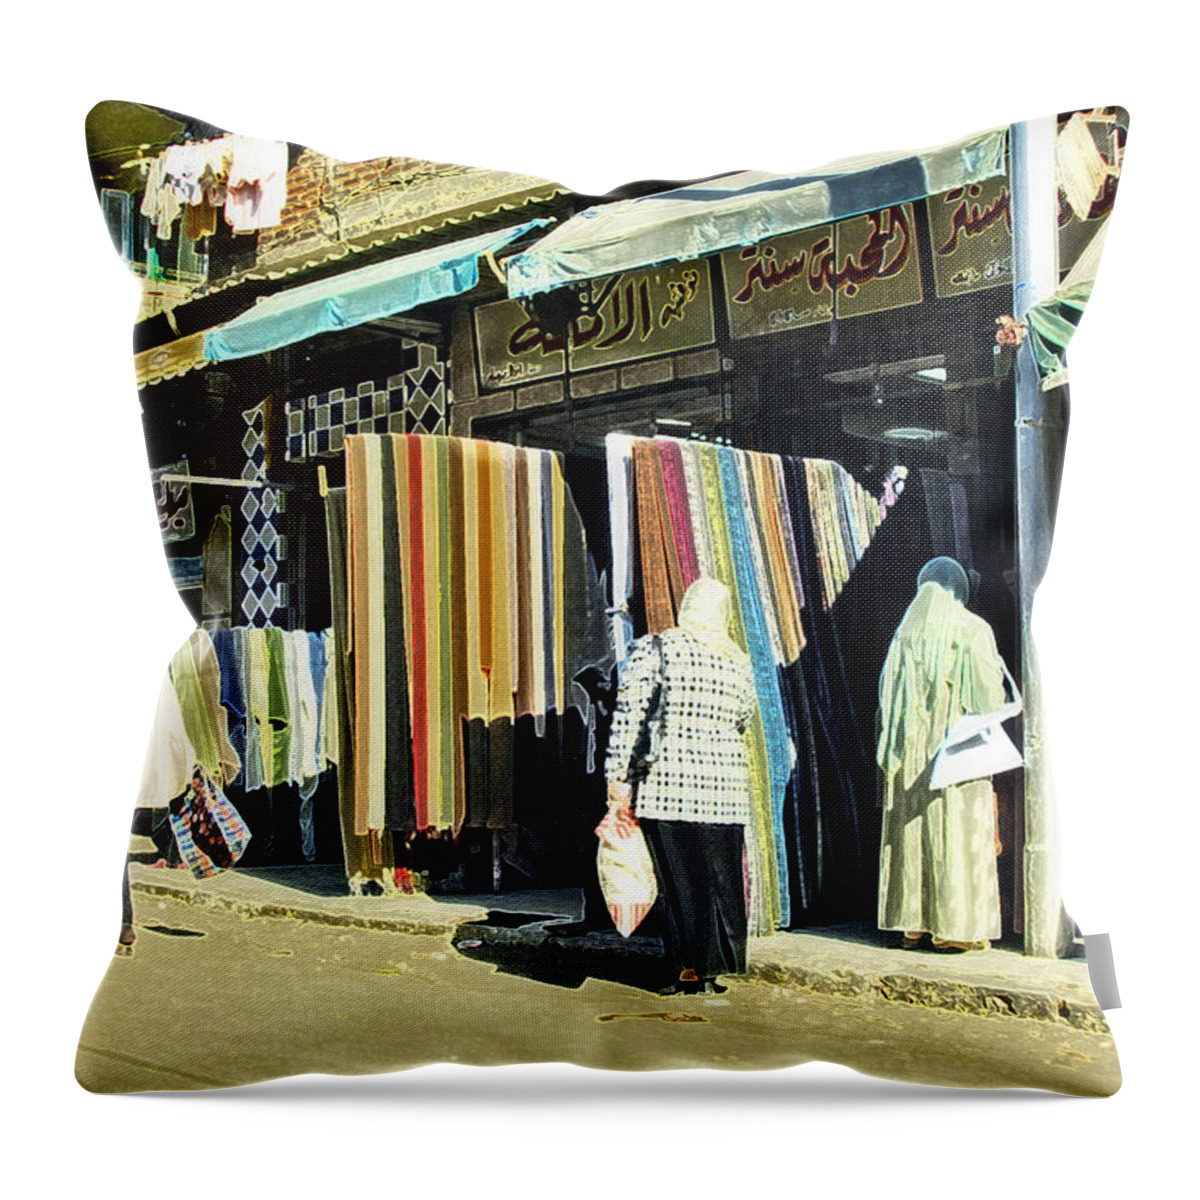 The Fabric Shop Throw Pillow featuring the photograph The Fabric Shop - Alexandria by Mary Machare